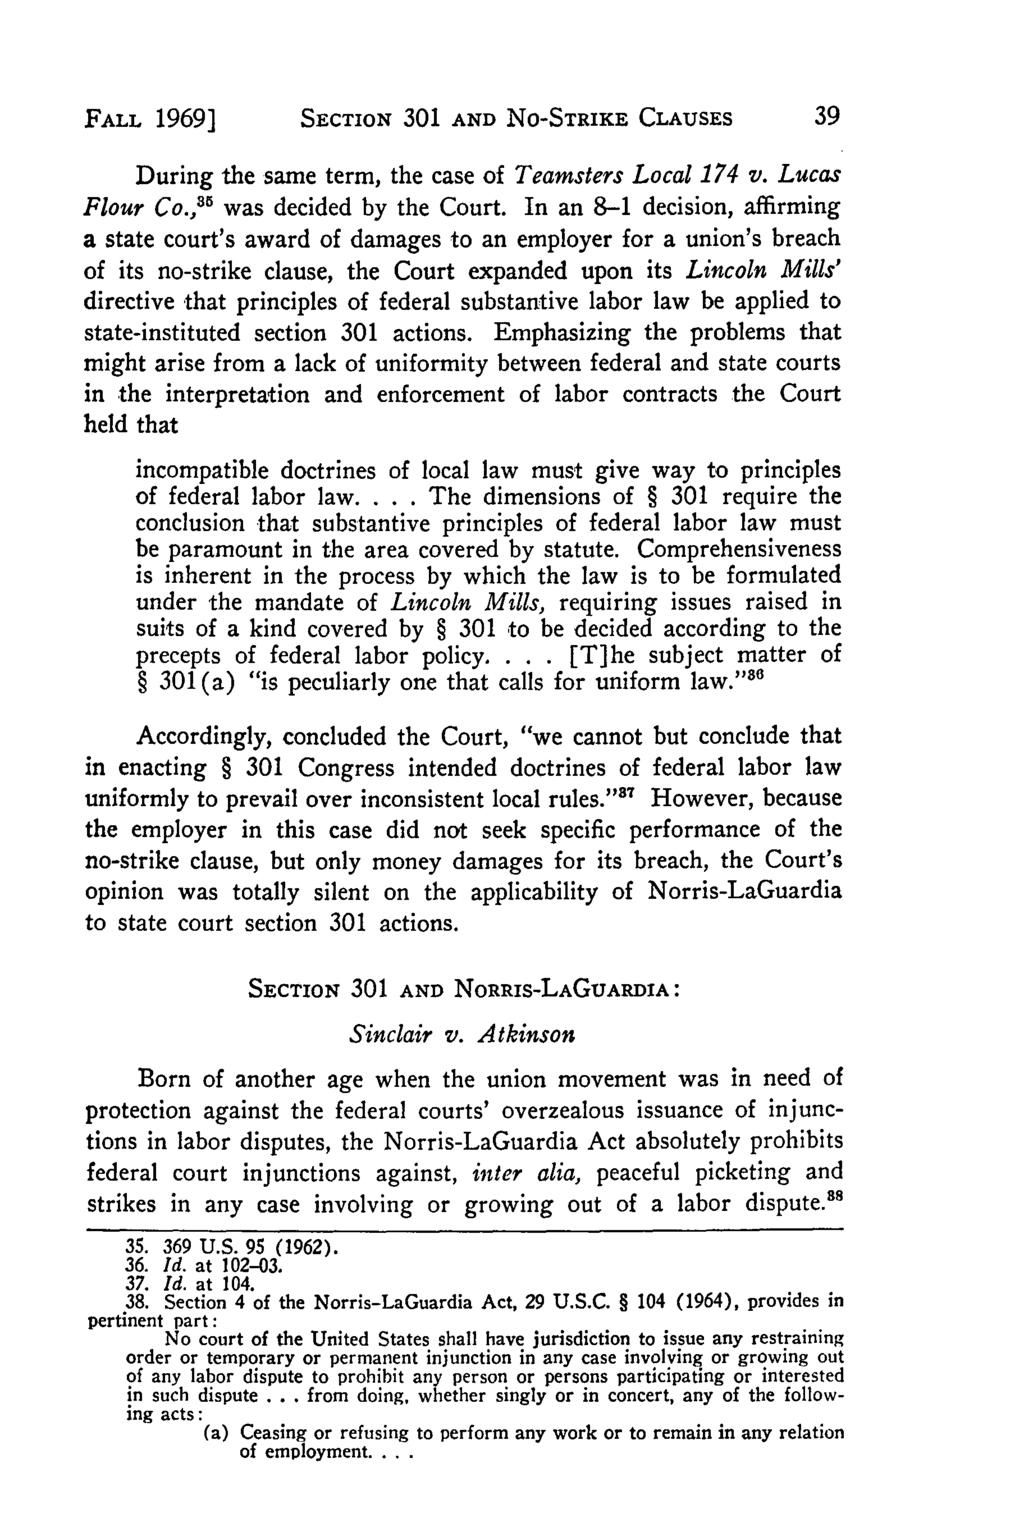 Villanova Law Review, Vol. 15, Iss. 1 [1969], Art. 2 FALL 1969] SECTION 301 AND NO-STRIKE CLAUSES During the same term, the case of Teamsters Local 174 v. Lucas Flour Co., 85 was decided by the Court.